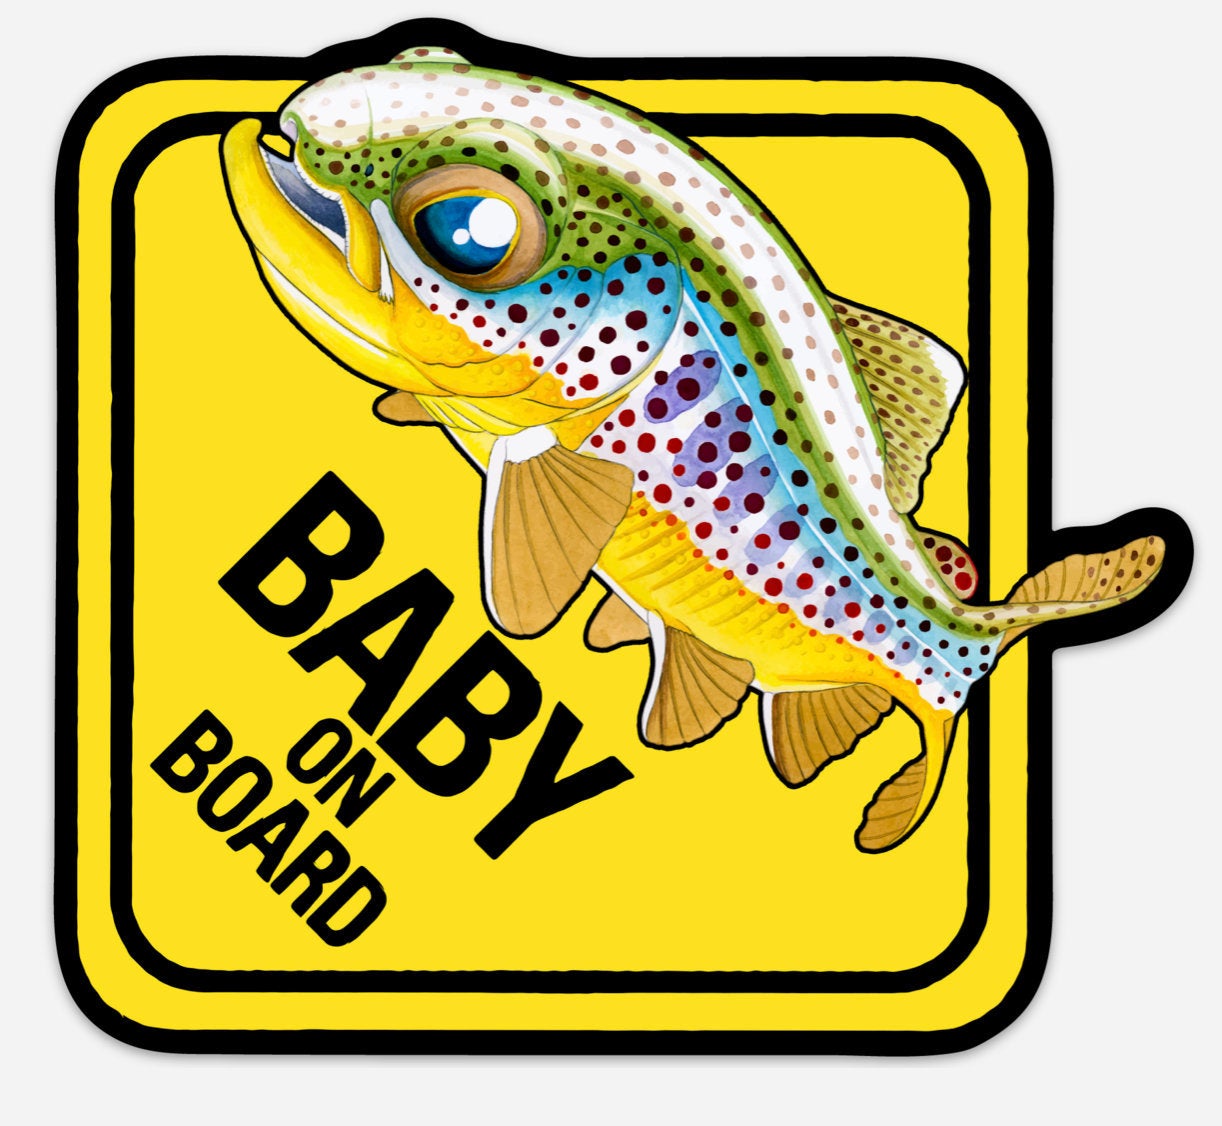 Nick Laferriere Baby On Board Trout Decals